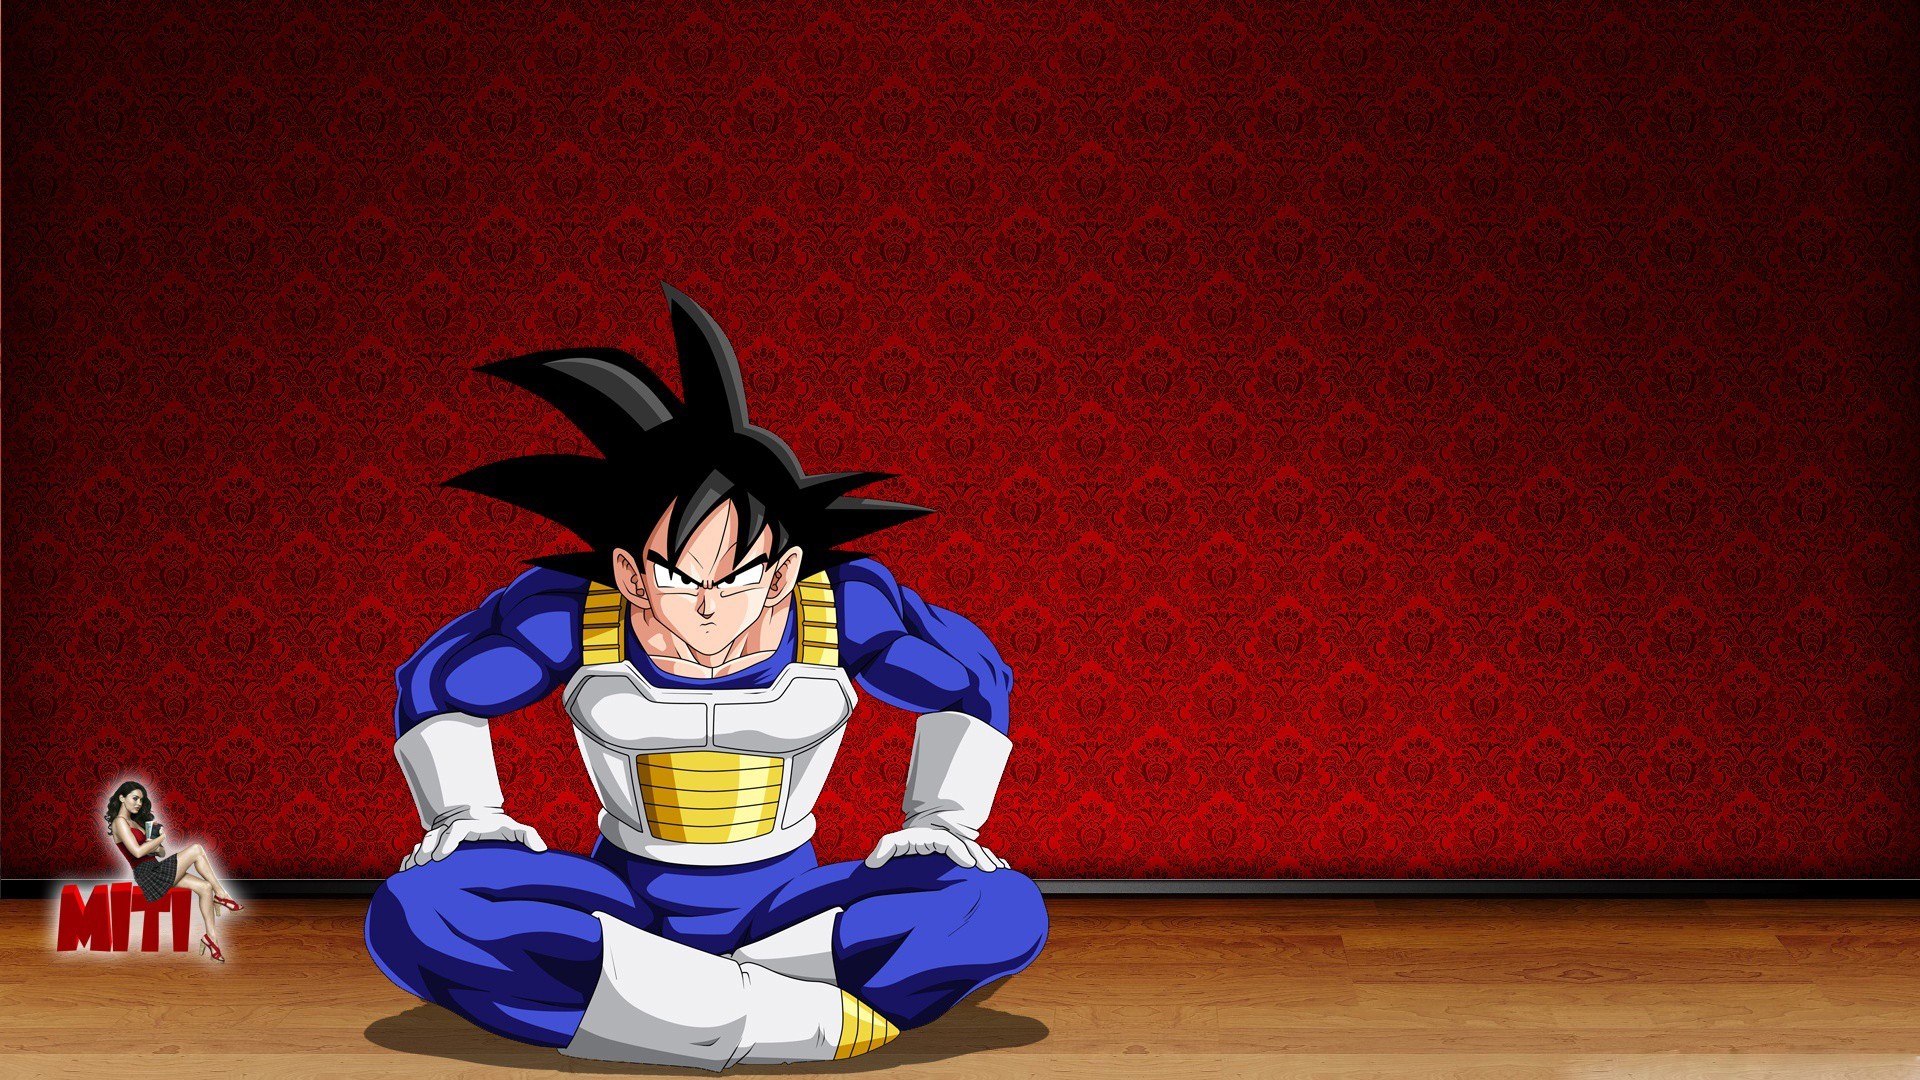 Wallpapers Goku Imagenes with image resolution 1920x1080 pixel. You can use this wallpaper as background for your desktop Computer Screensavers, Android or iPhone smartphones